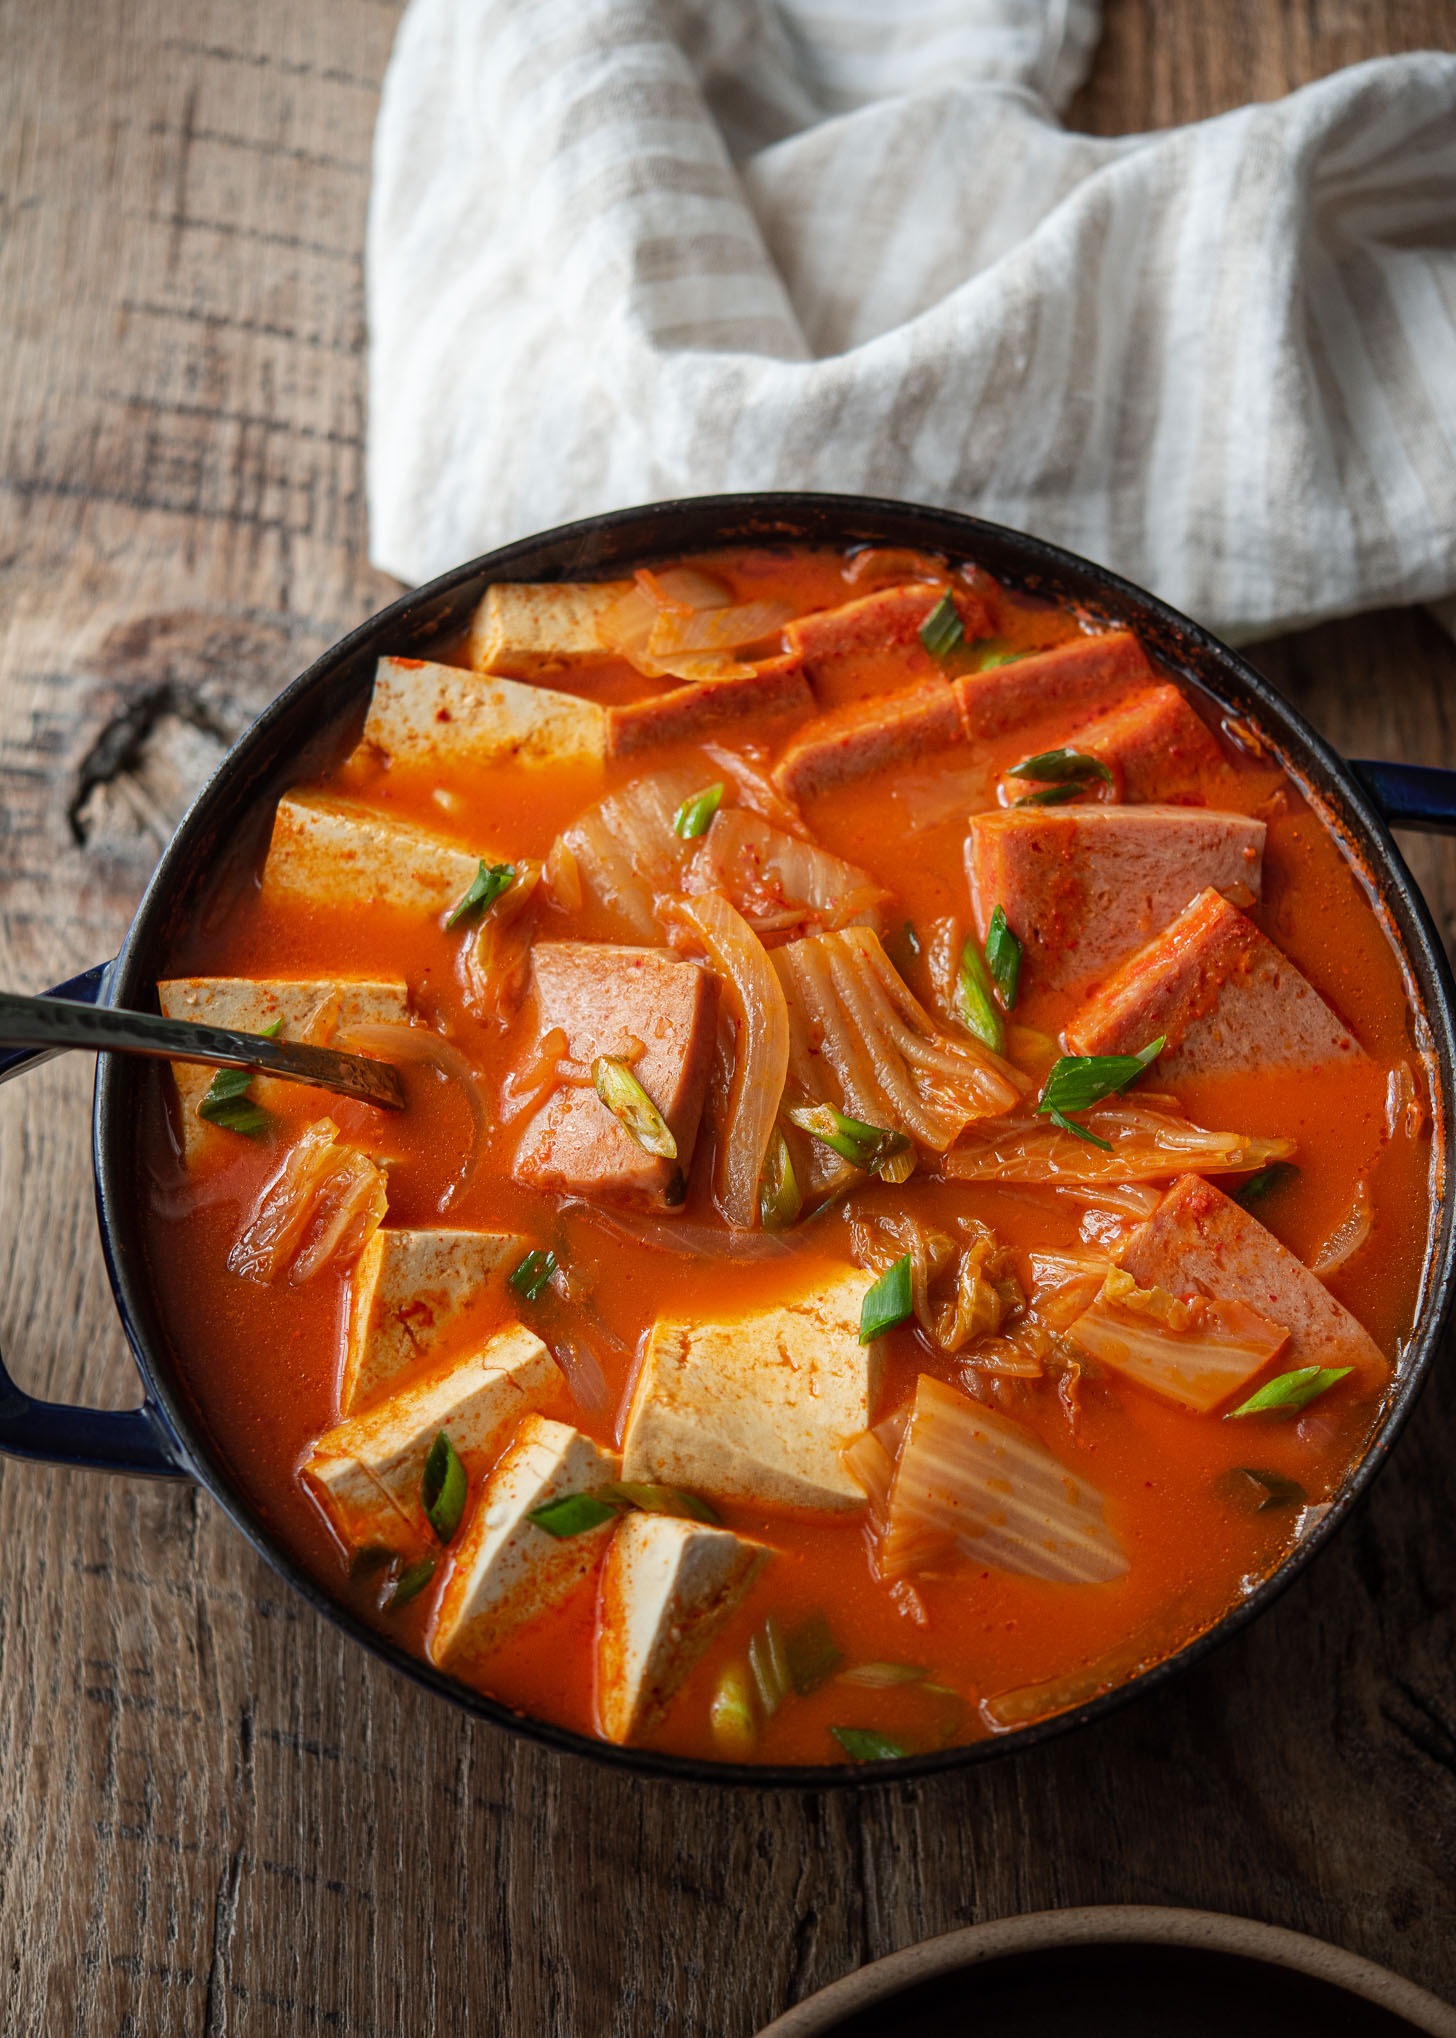 Kimchi jigae made with Spam and tofu are served in a pot.